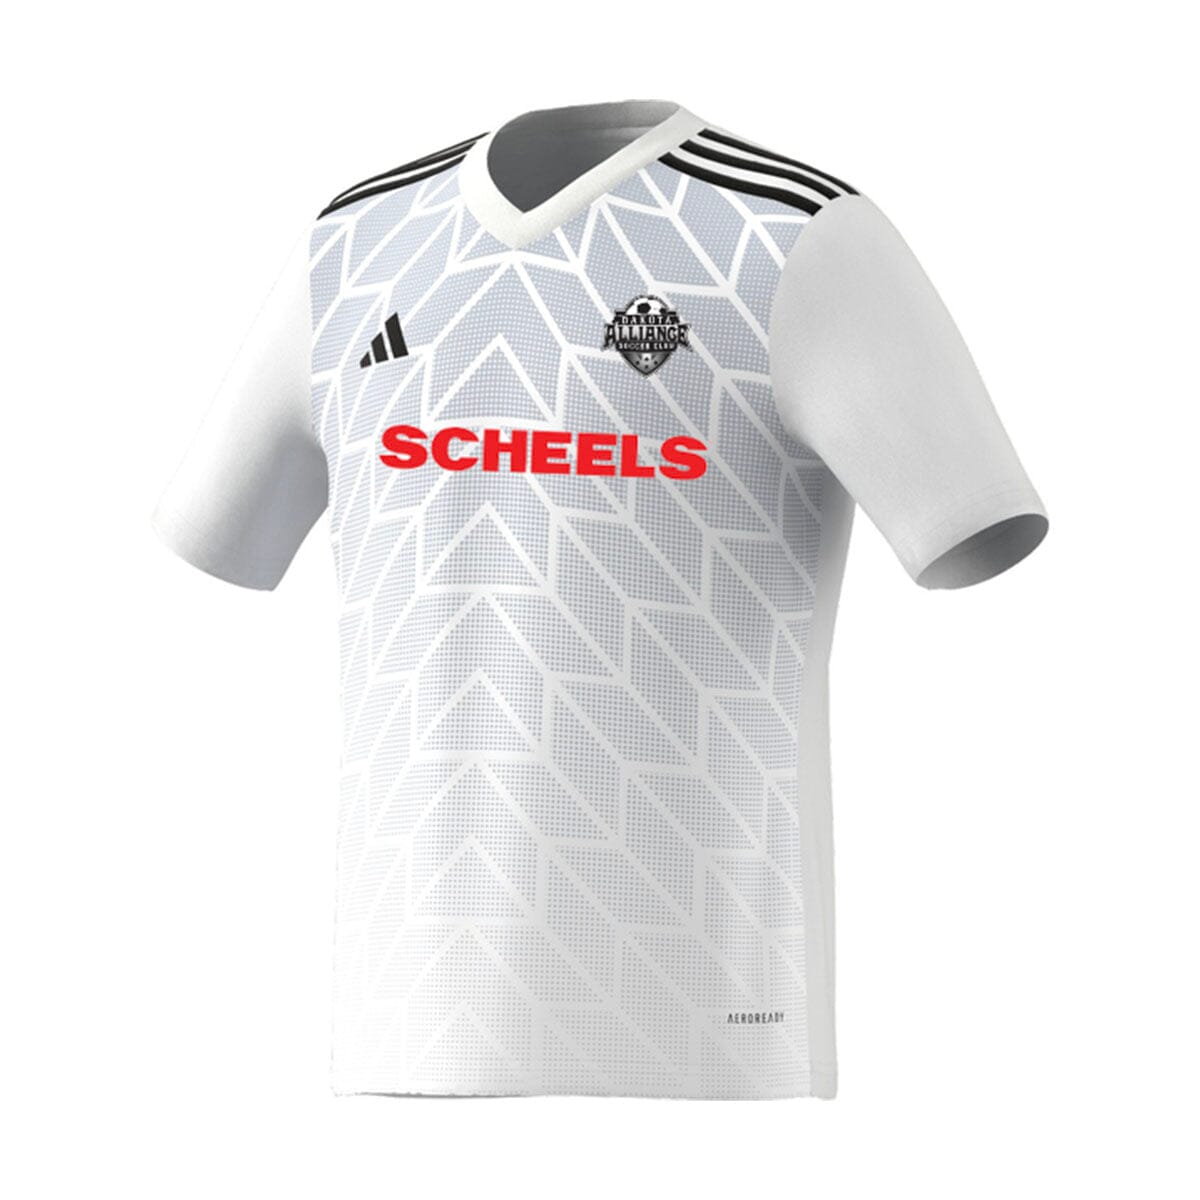 Adidas Goalkeeper Uniform Templates for 2022-23 (Likely to be used